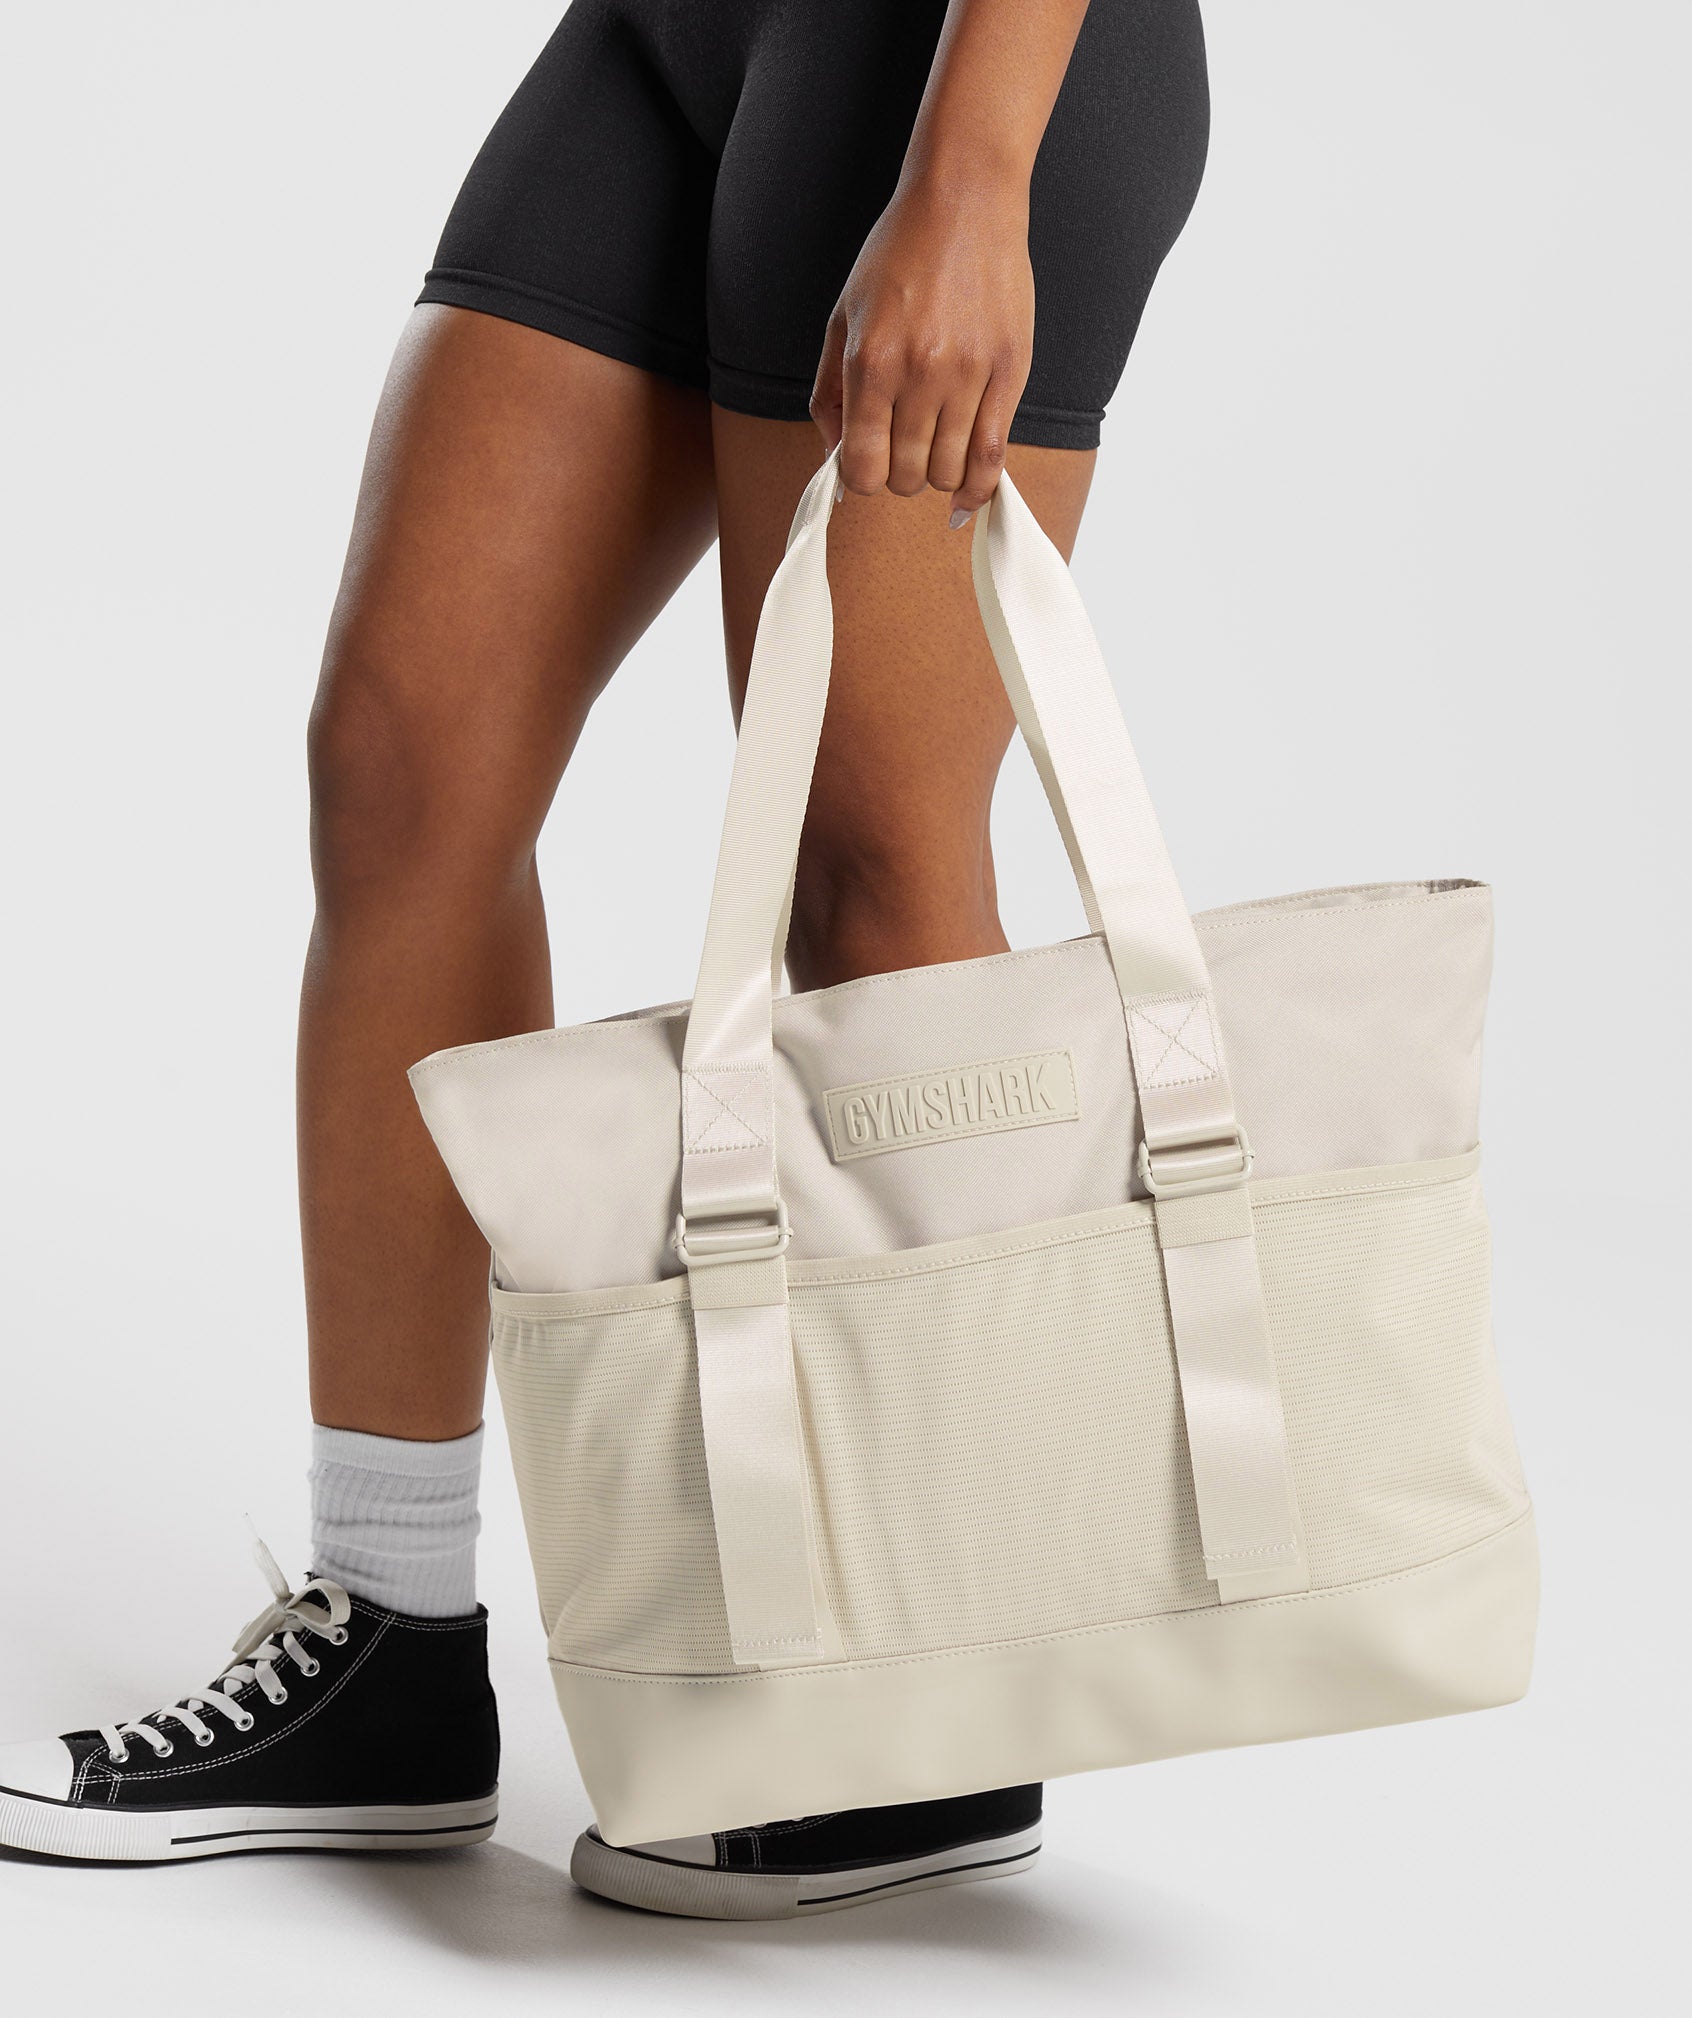 Everyday Tote in Pebble Grey - view 4